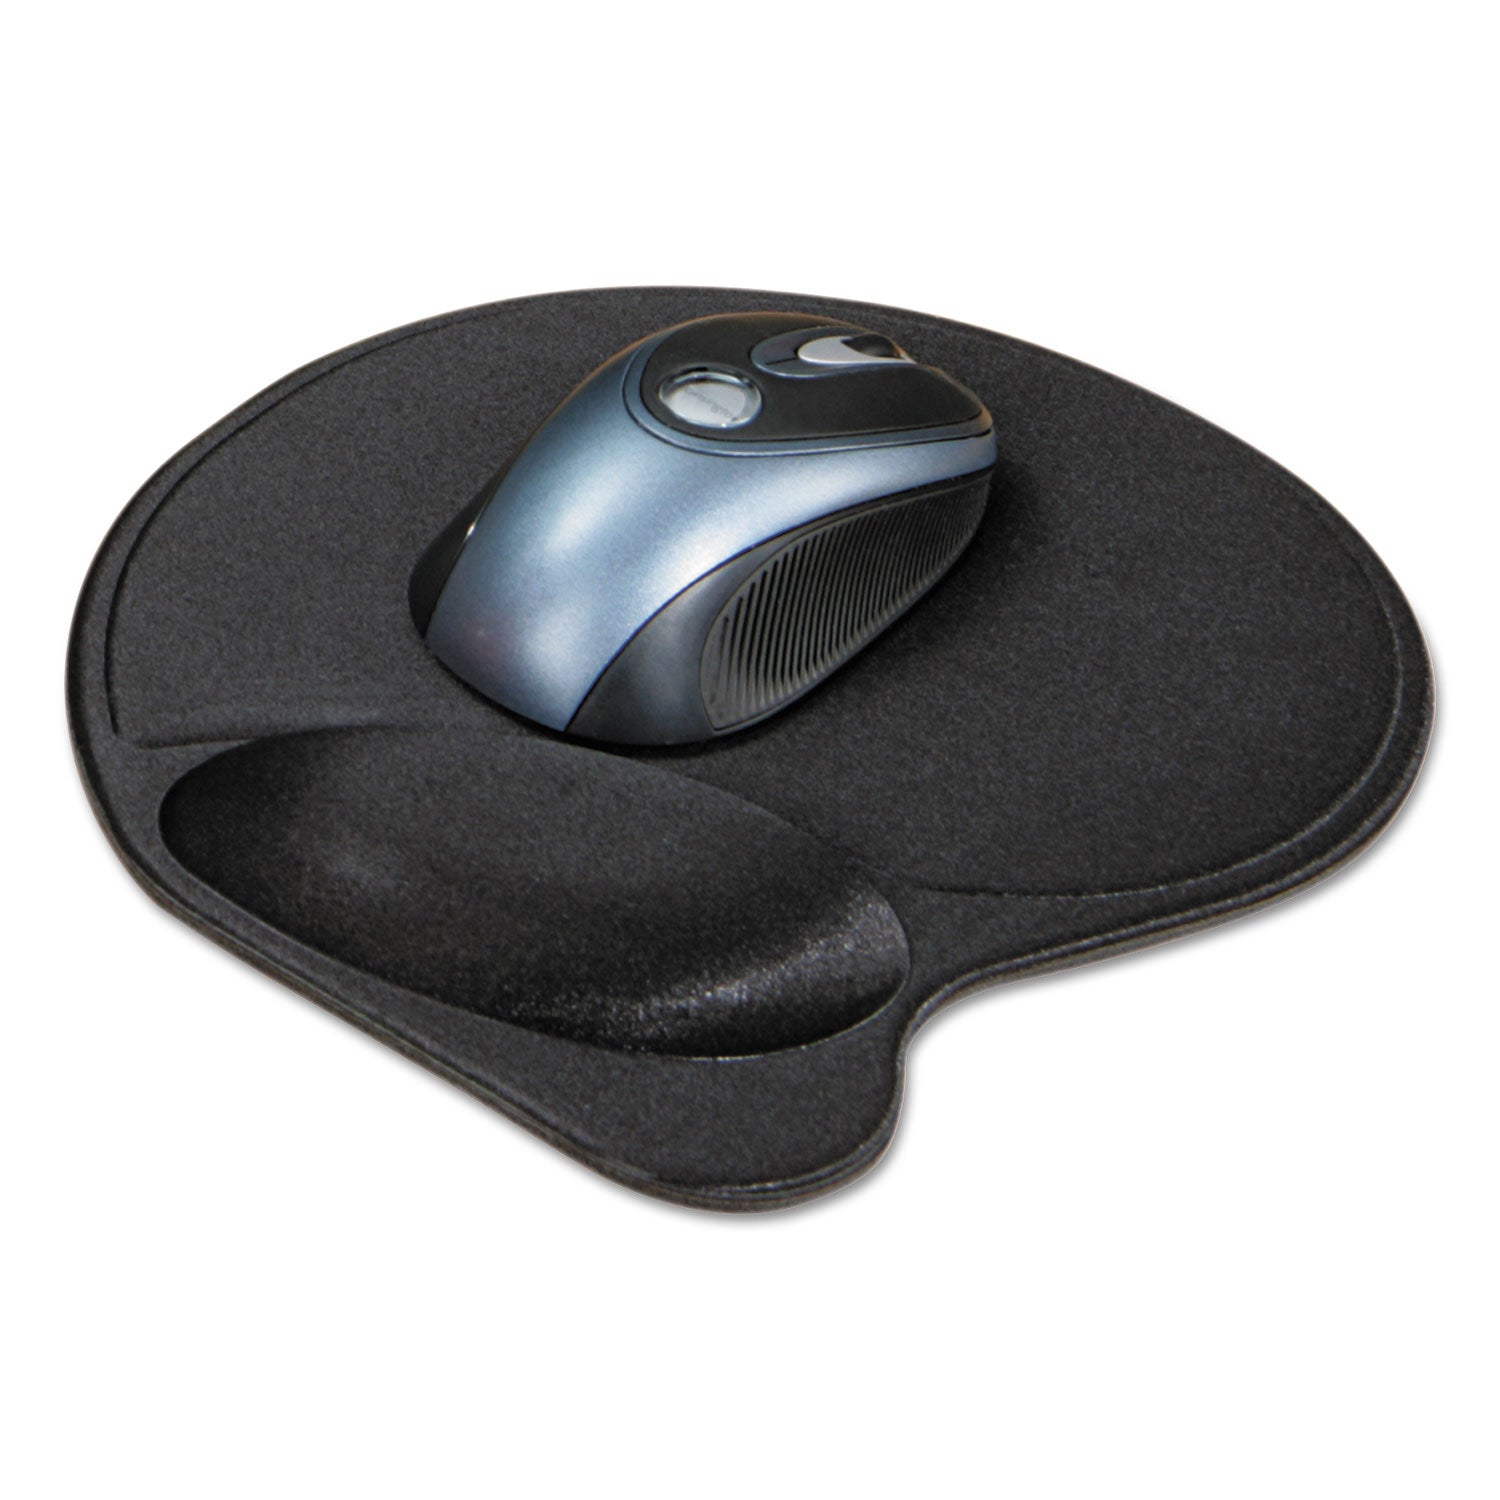 Wrist Pillow Extra-Cushioned Mouse Support, 7.9 x 10.9, Black - 